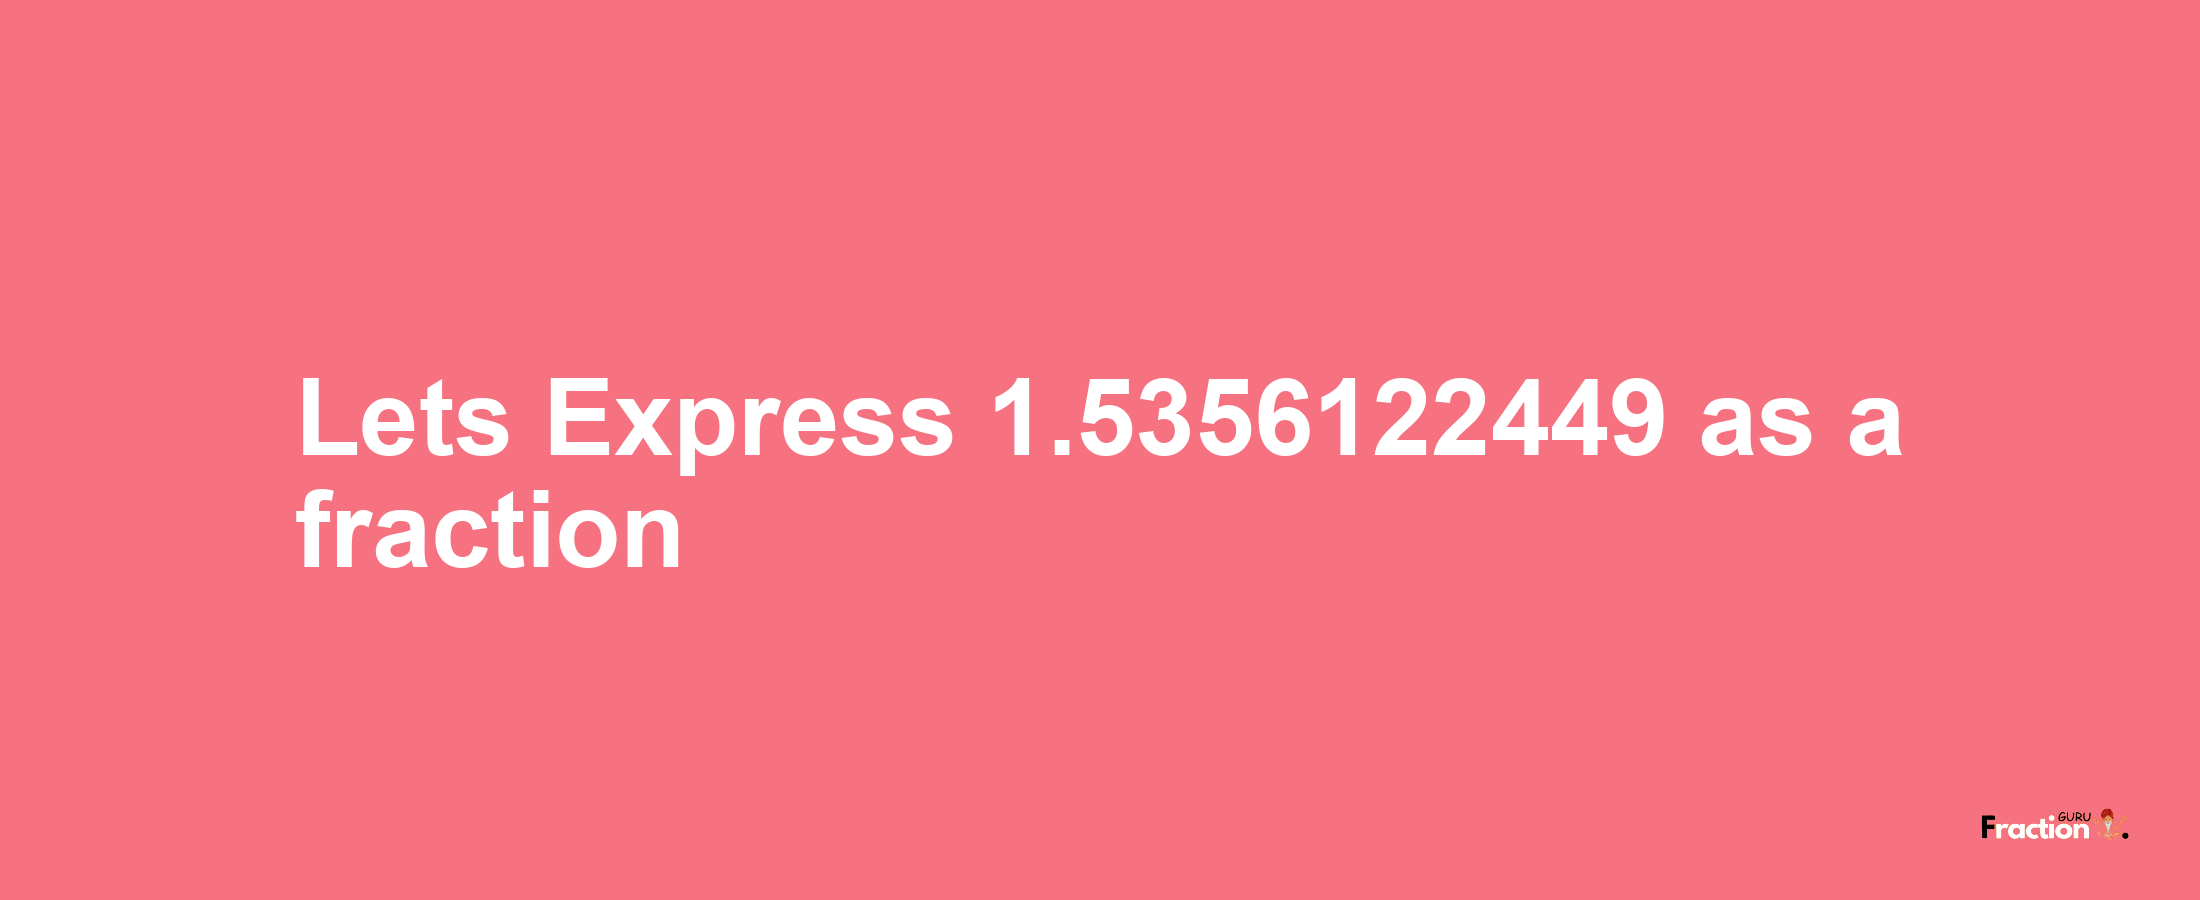 Lets Express 1.5356122449 as afraction